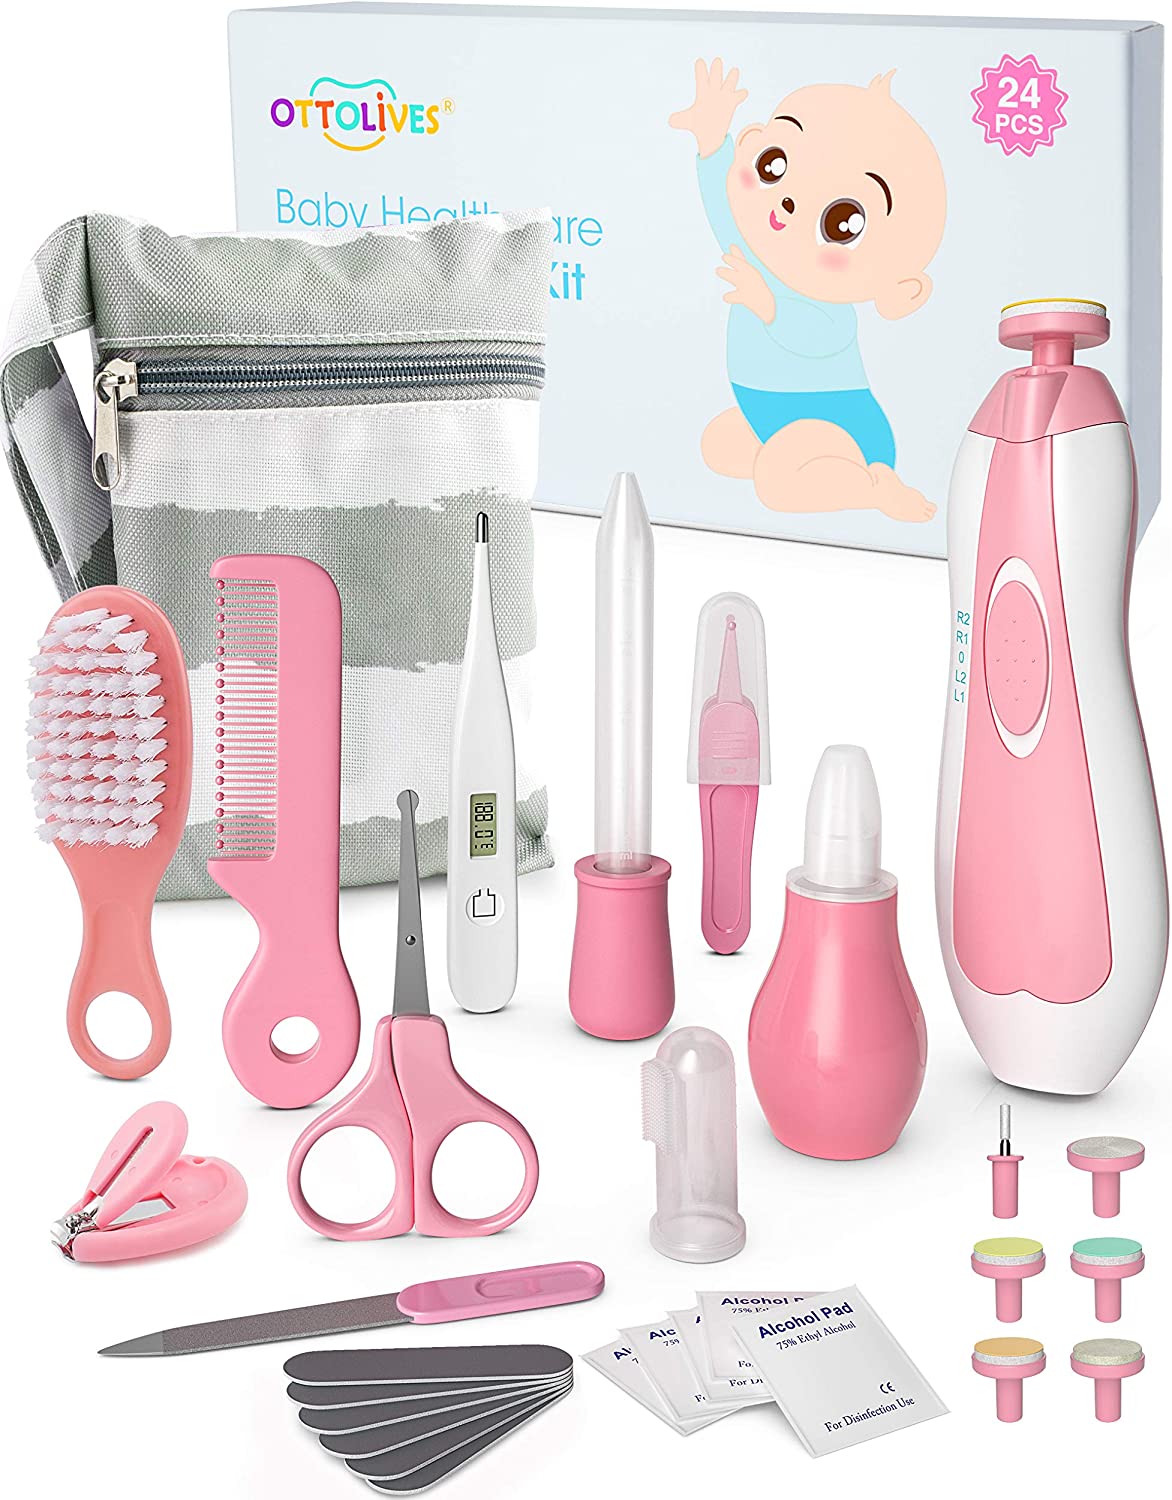 OTTOLIVES Grooming Set & Tote Baby Shower Gift, 24-Piece